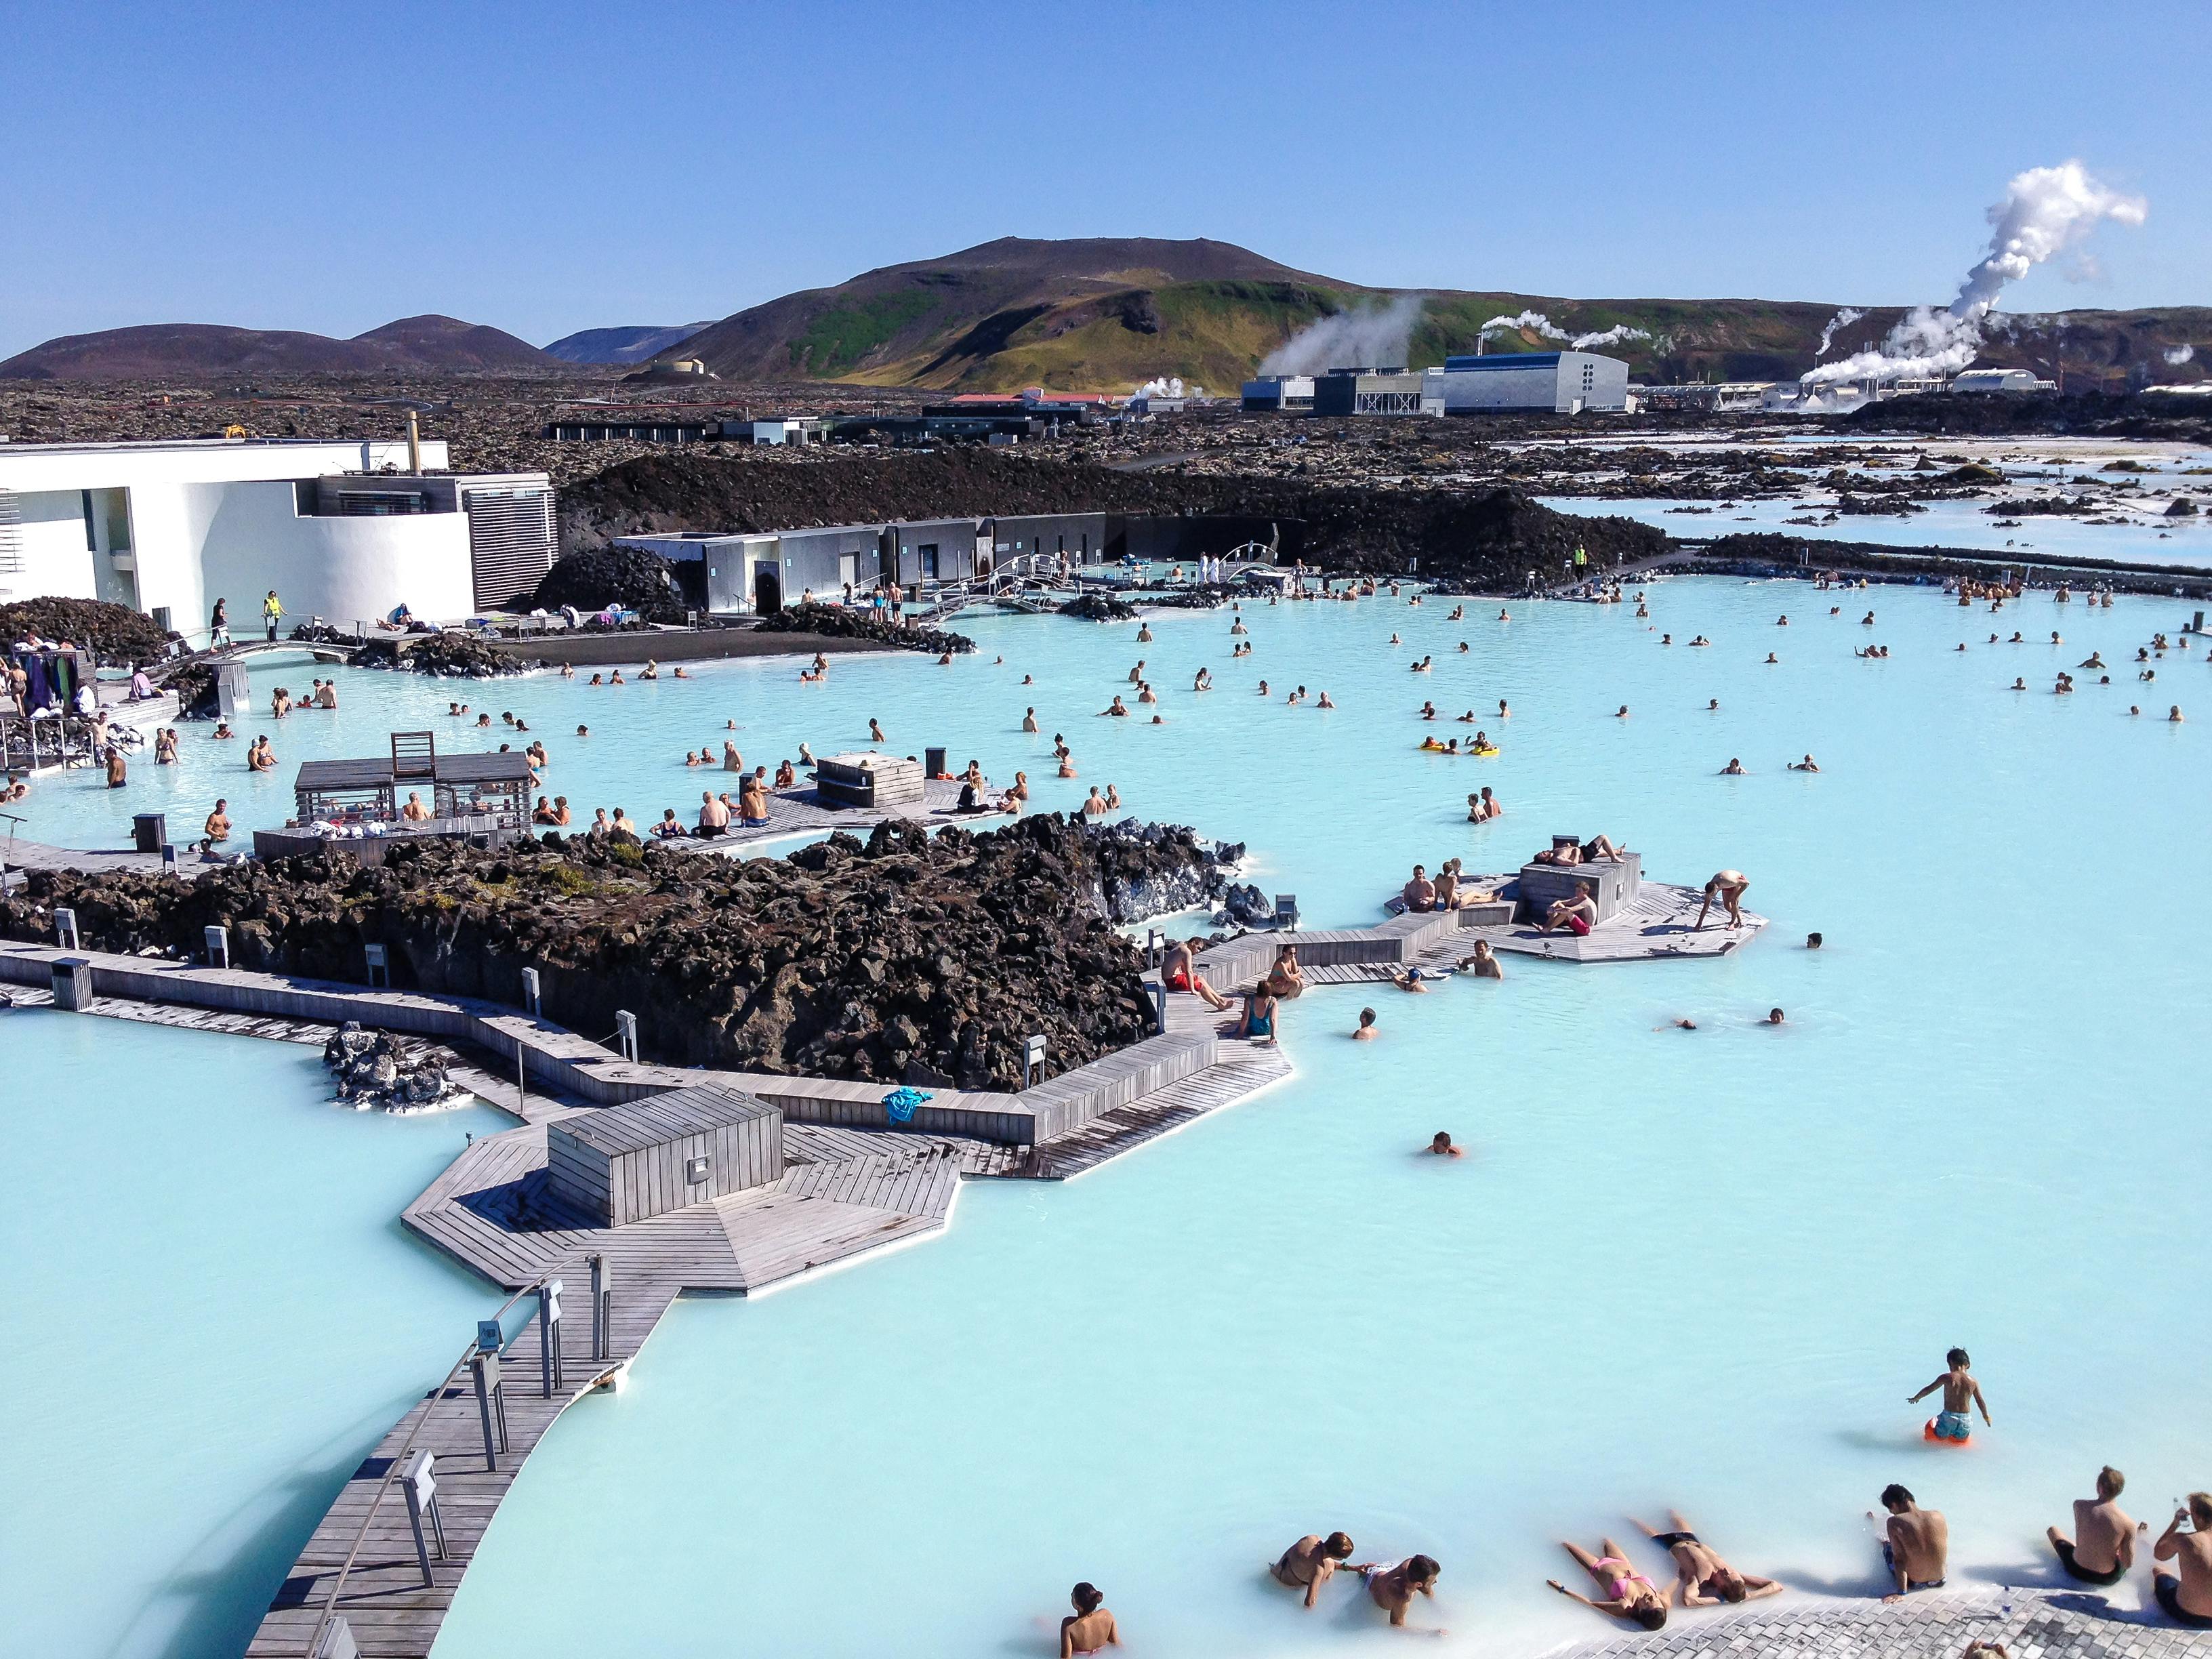 Private Luxury Jeep Transfer from Reykjavik to Keflavik Airport via Blue Lagoon